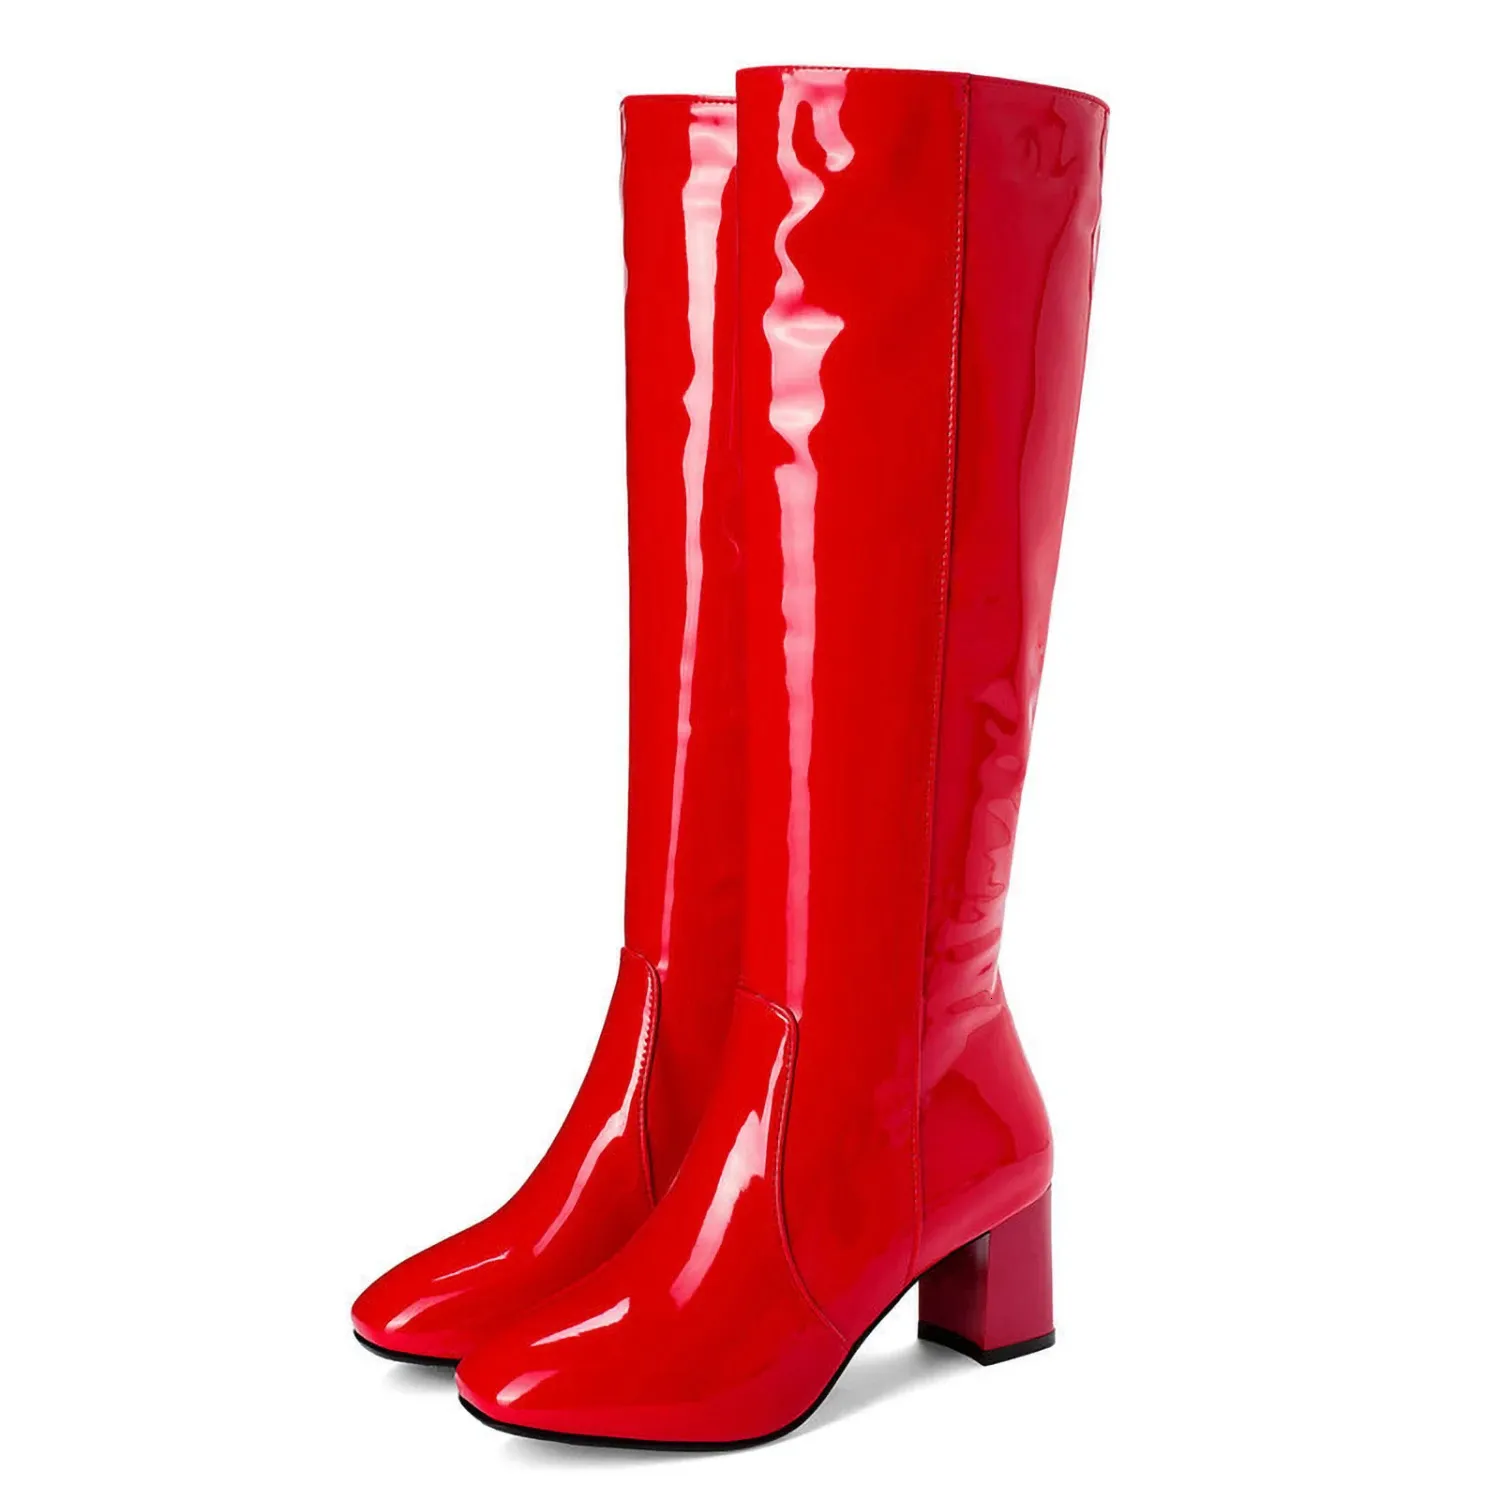 Boots Halloween Women Boots Fashion Go Boots Cosplay White Red Knee High Boots For Women Plus Size Zipper Boats High Heel Shoes 231124